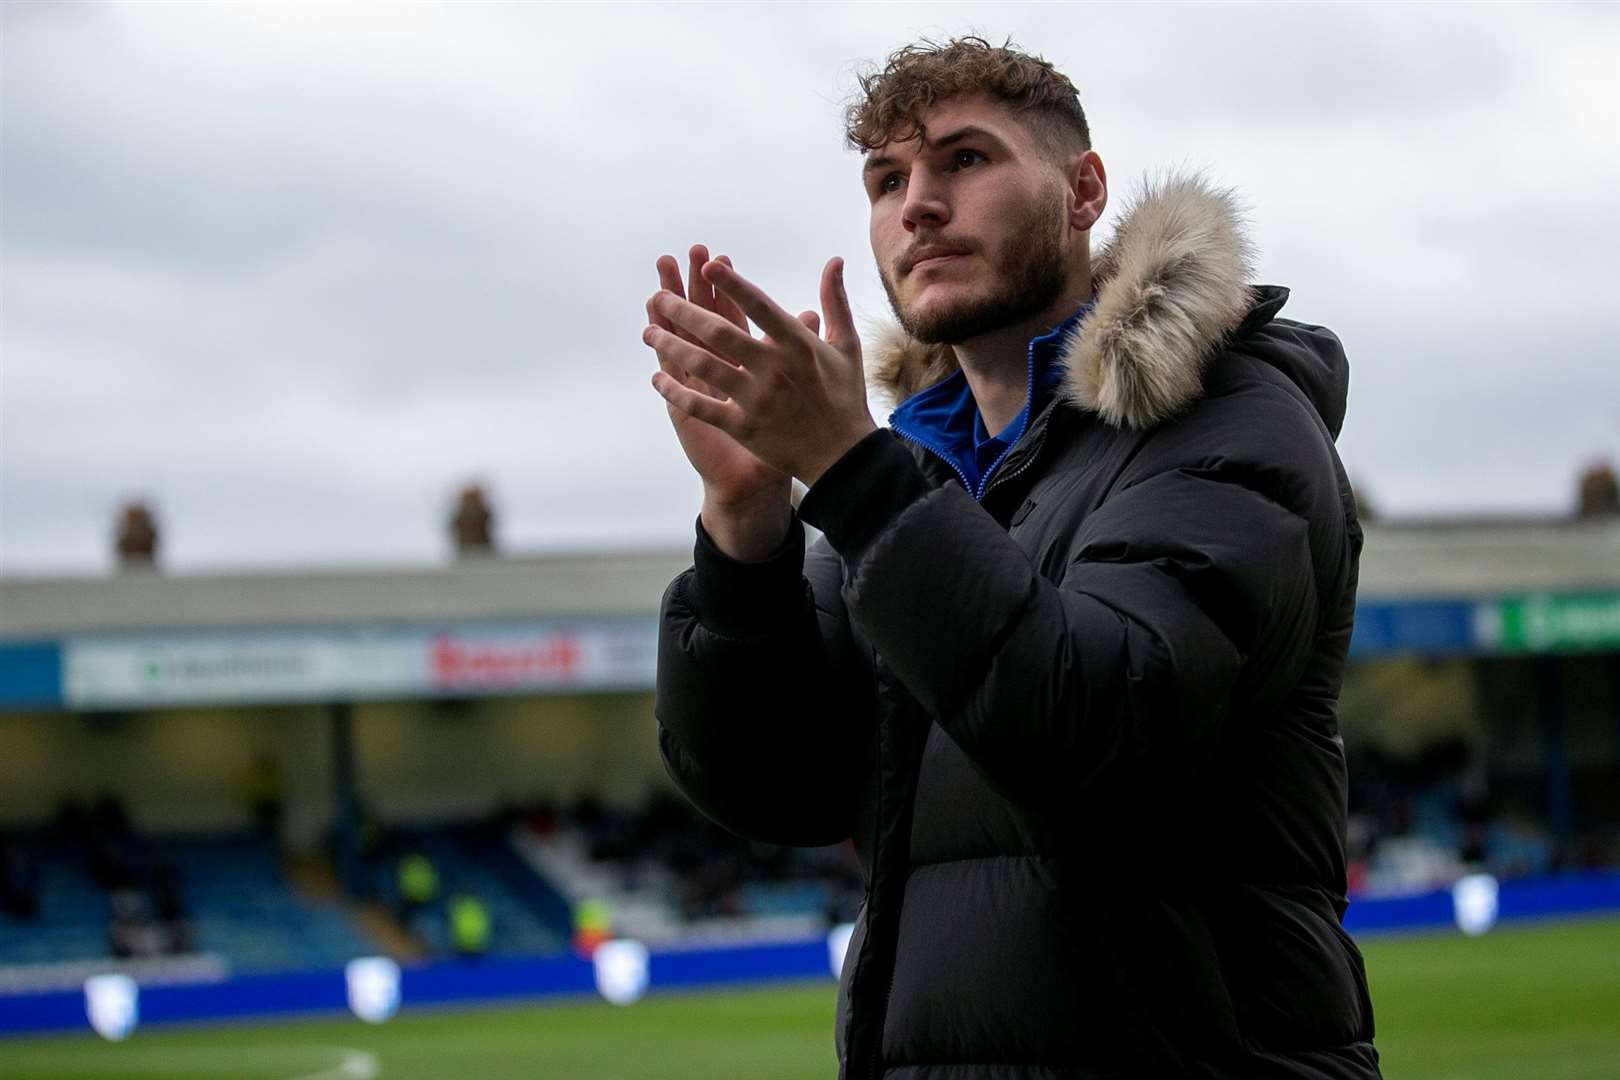 Josh Andrews was there on Saturday as Gillingham played Walsall Picture: @Julian_KPI